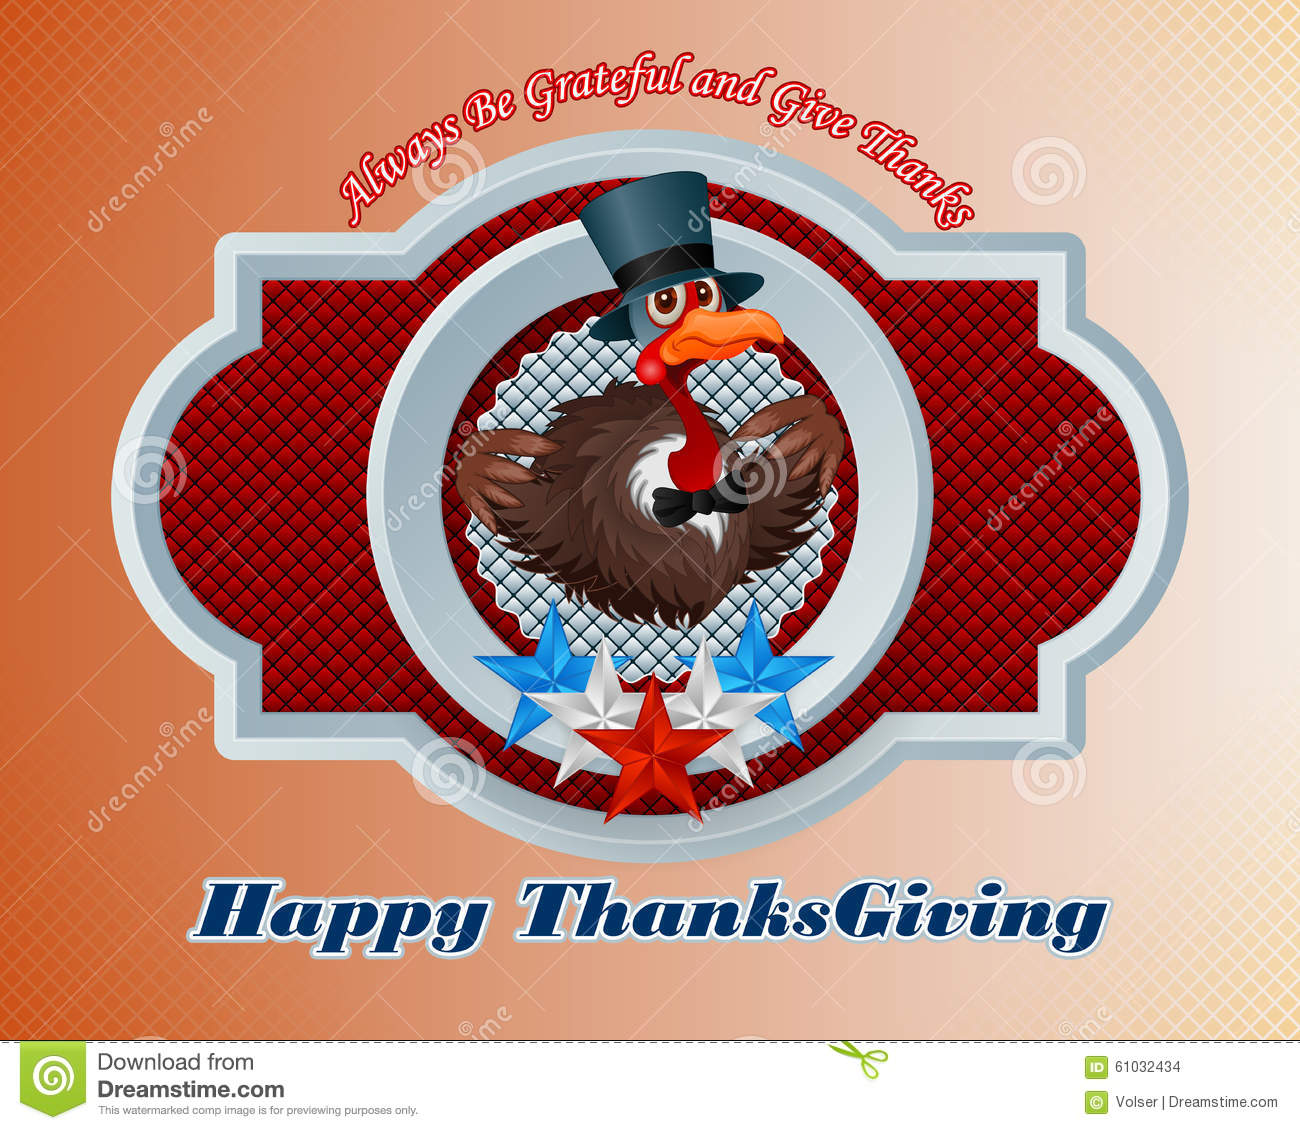 Message And Cartoon Of A Pompous Turkey Wearing A Top Hat And Bow Tie